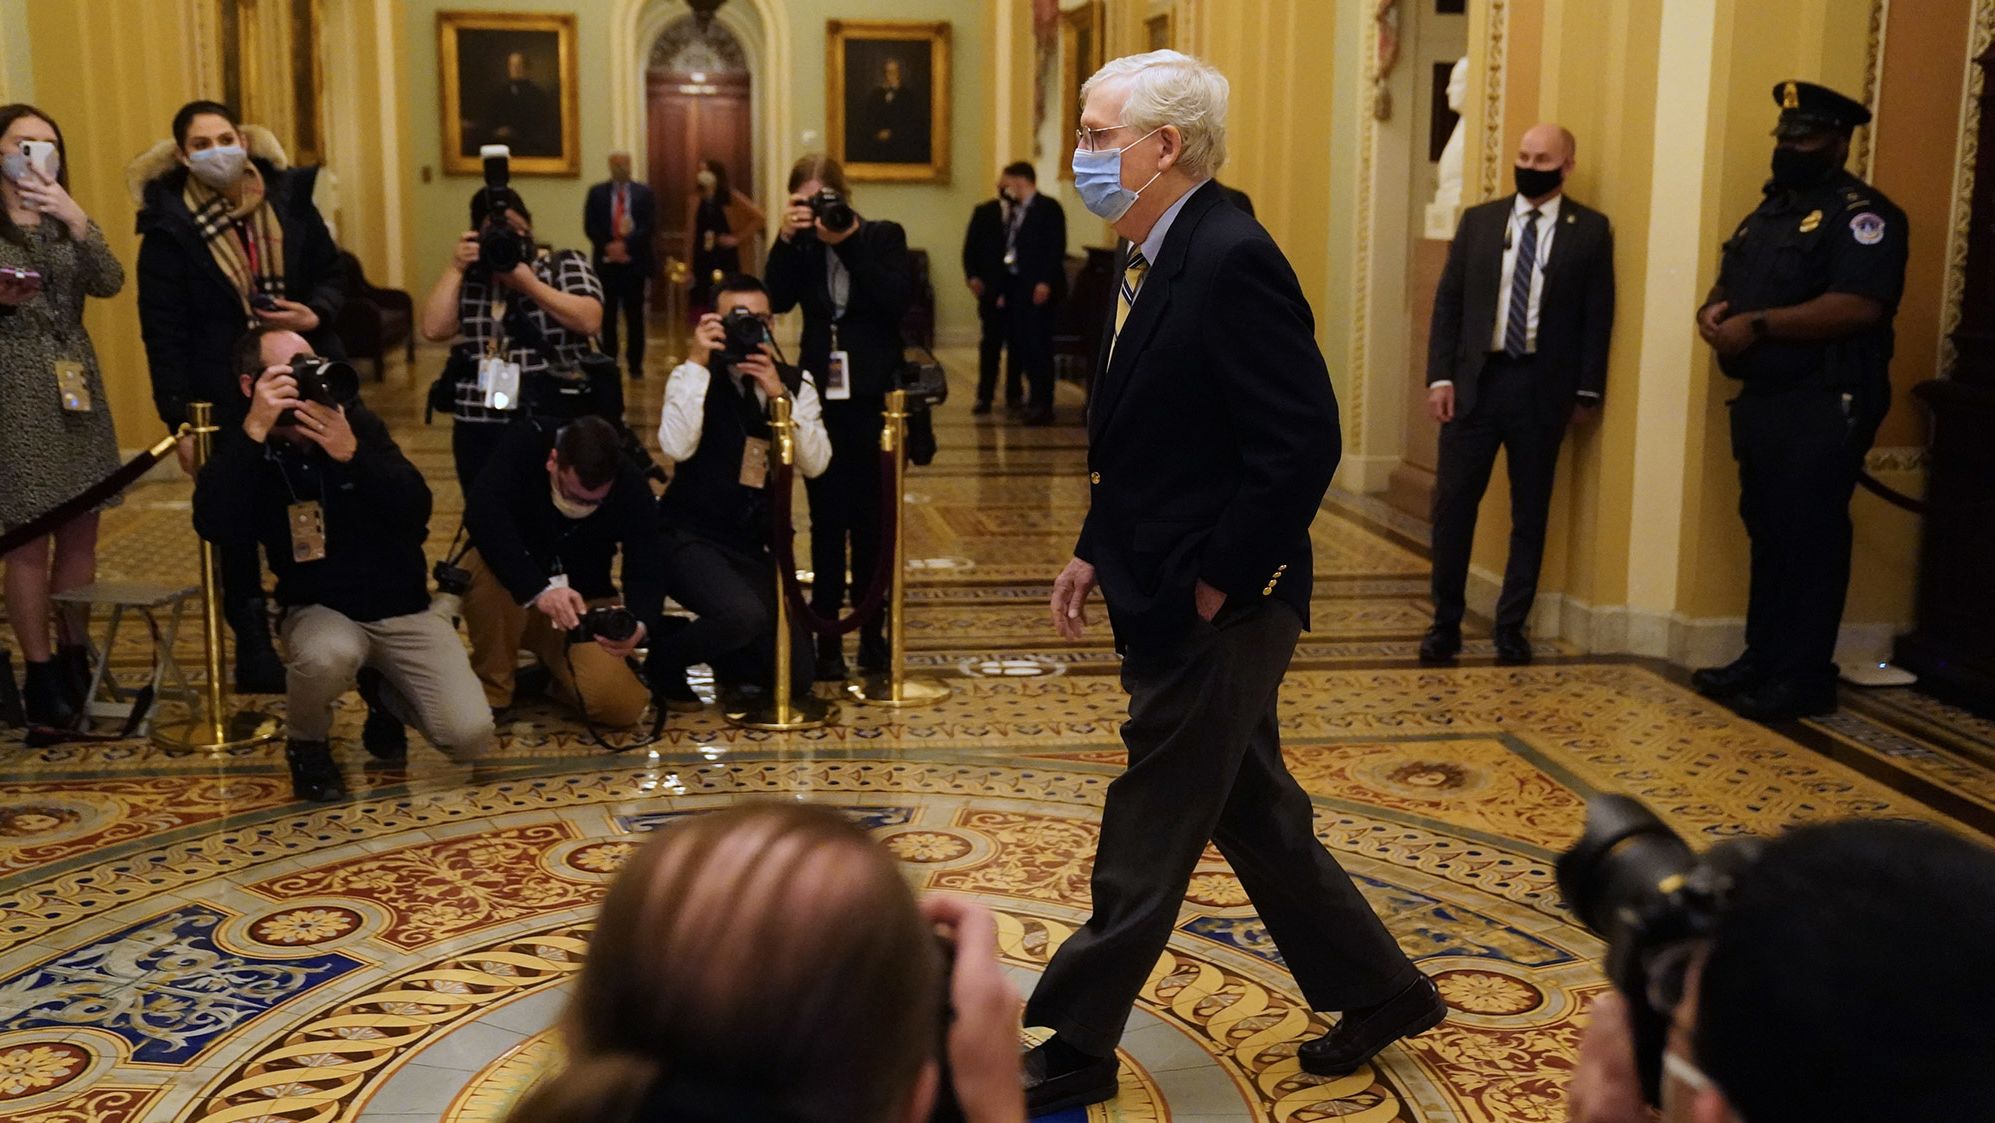 Senate Minority Leader Mitch McConnell walks to the Senate Chamber on Saturday. McConnell <a href="https://www.cnn.com/2021/02/13/politics/mitch-mcconnell-acquit-trump/index.html" target="_blank">voted not guilty,</a> saying he didn't think the Senate had the "power to convict and disqualify a former office holder who is now a private citizen." But he still put blame on Trump. "There's no question — none — that President Trump is practically and morally responsible for provoking the events of the day," <a href="https://www.cnn.com/politics/live-news/trump-impeachment-trial-02-13-2021/h_1f51fbdbd5a745e9151383b8f34cf65a" target="_blank">McConnell said.</a> "No question about it. The people who stormed this building believed they were acting on the wishes and instructions of their President."